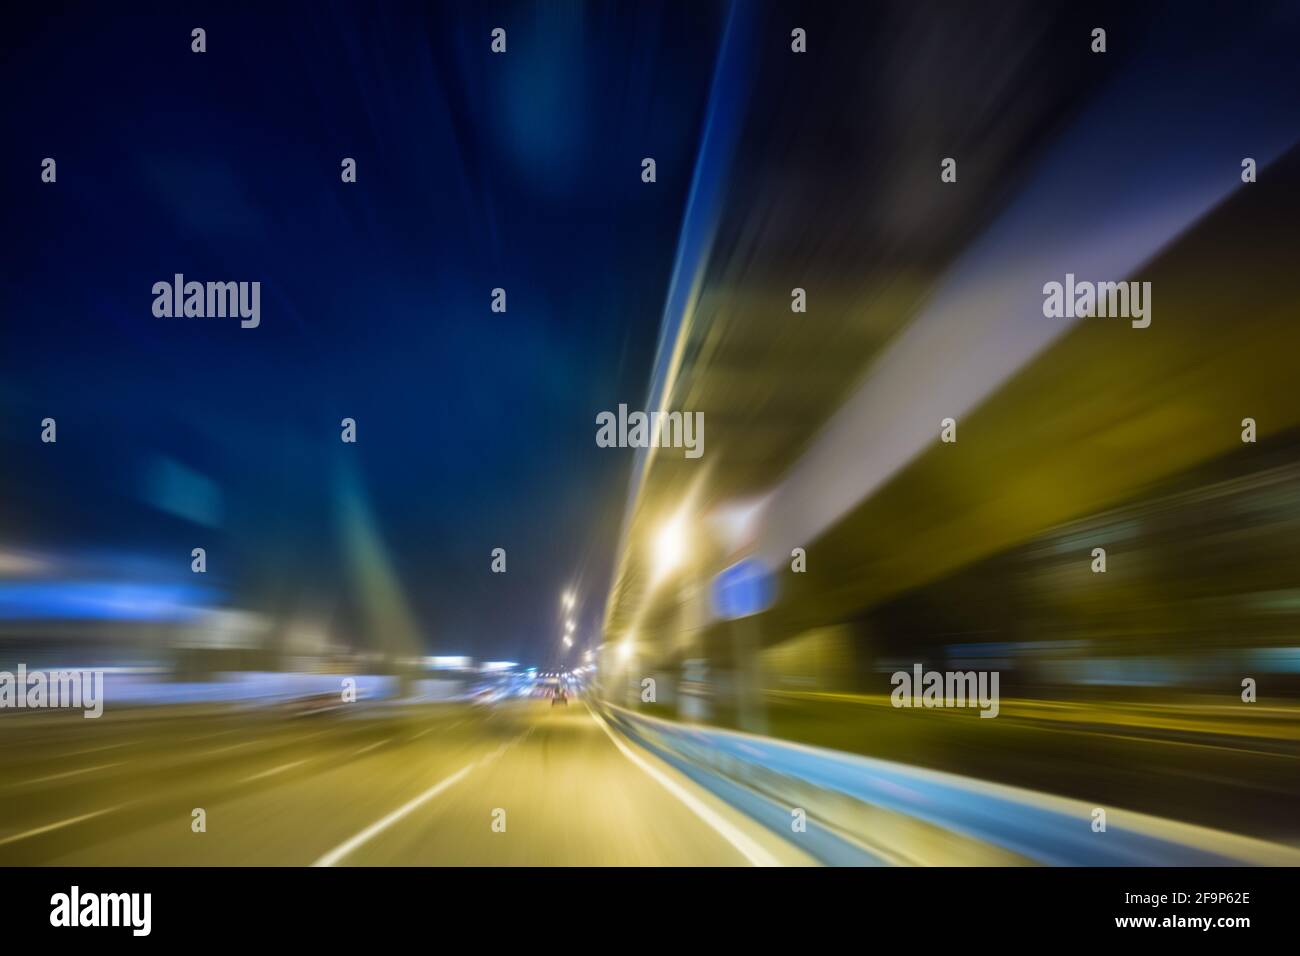 high-speed movement on the night road Stock Photo